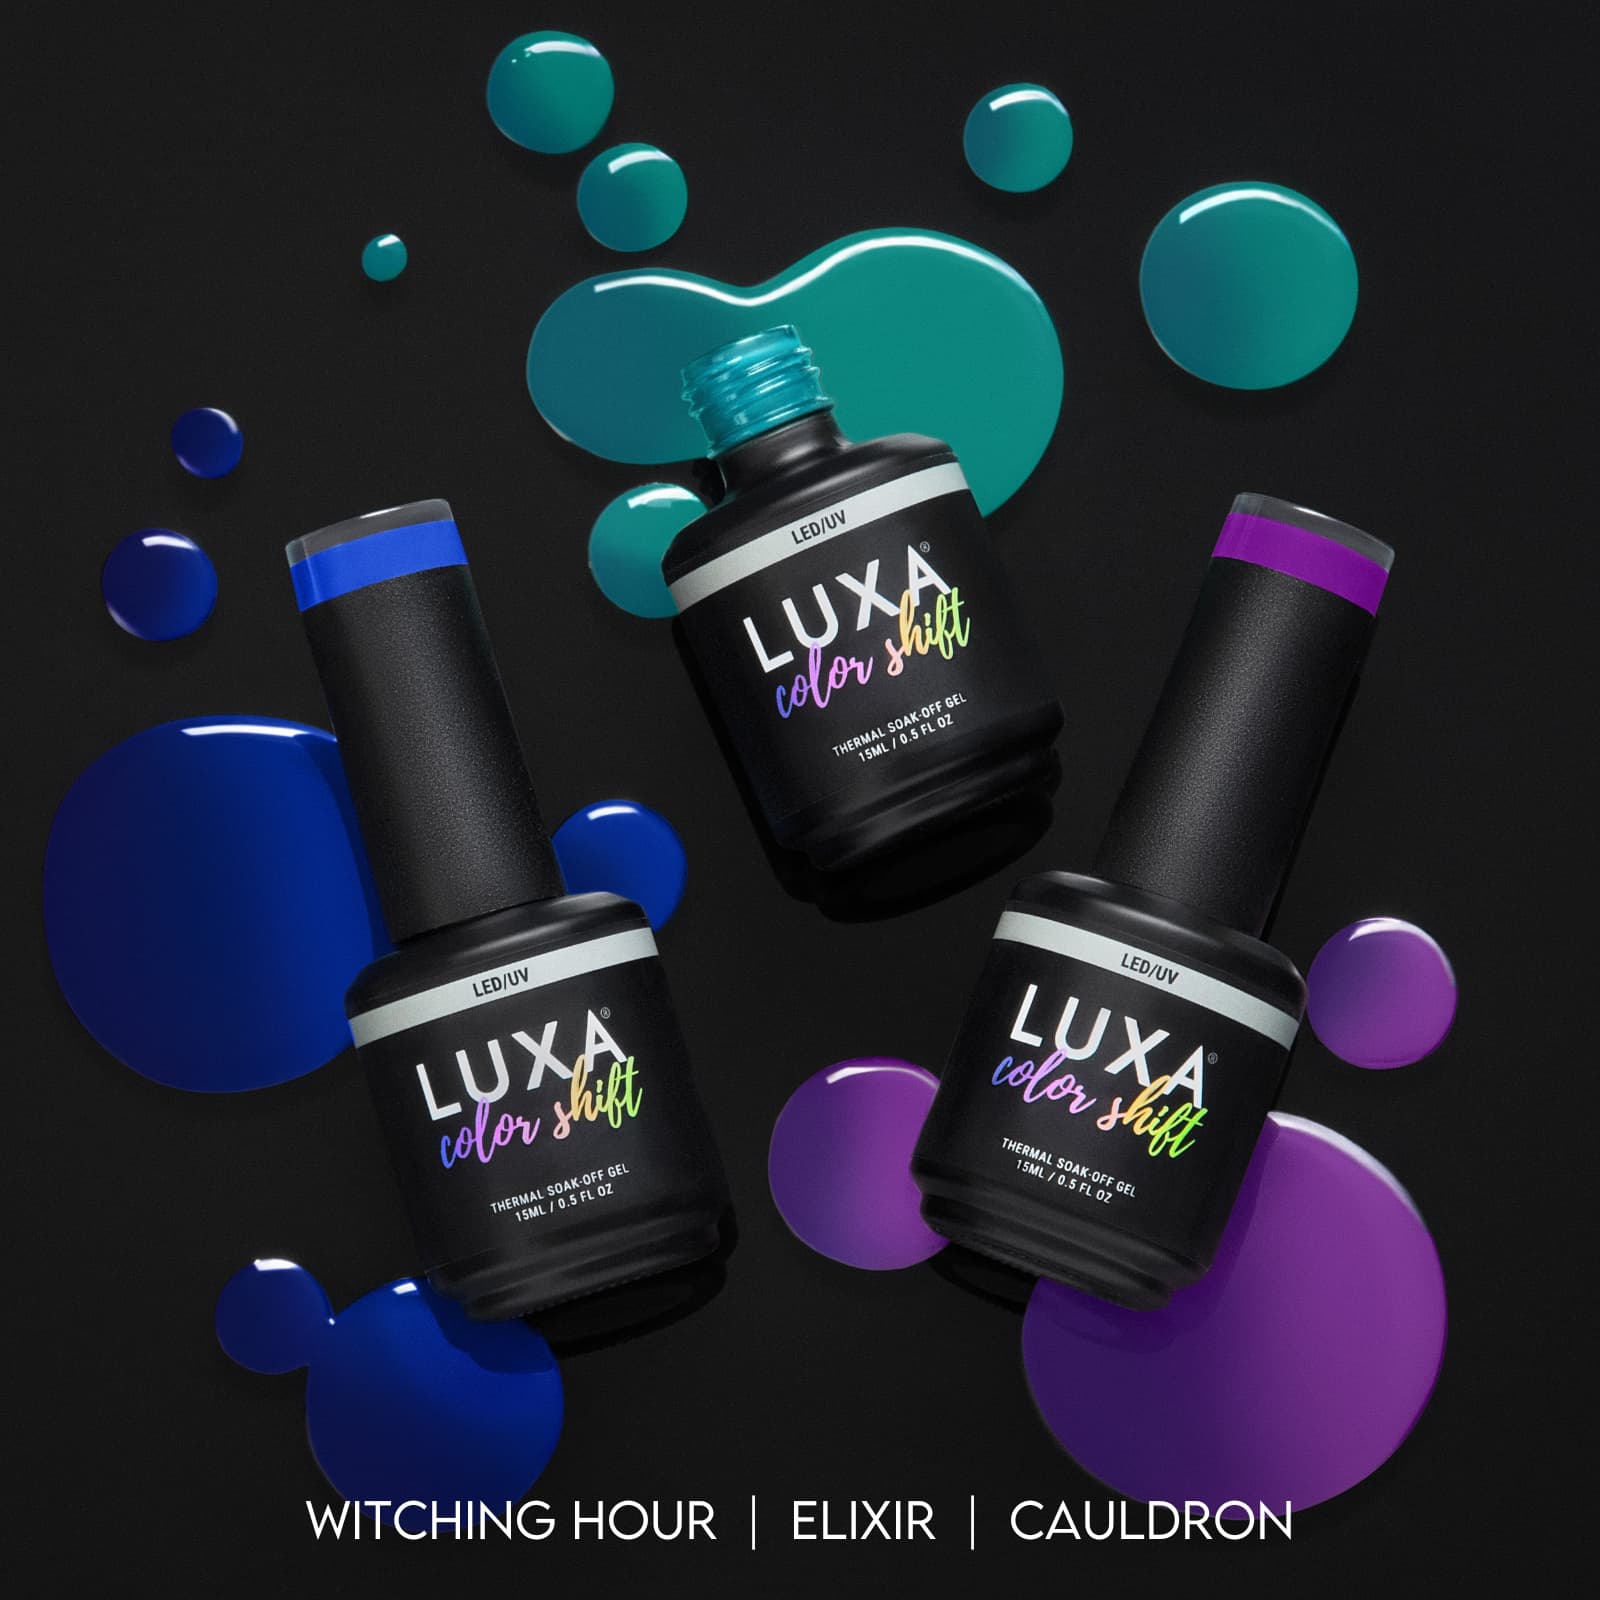 Luxapolish Bewitched Colour Shift Vol III - 3pcs With Free Painted Swatch Sticks